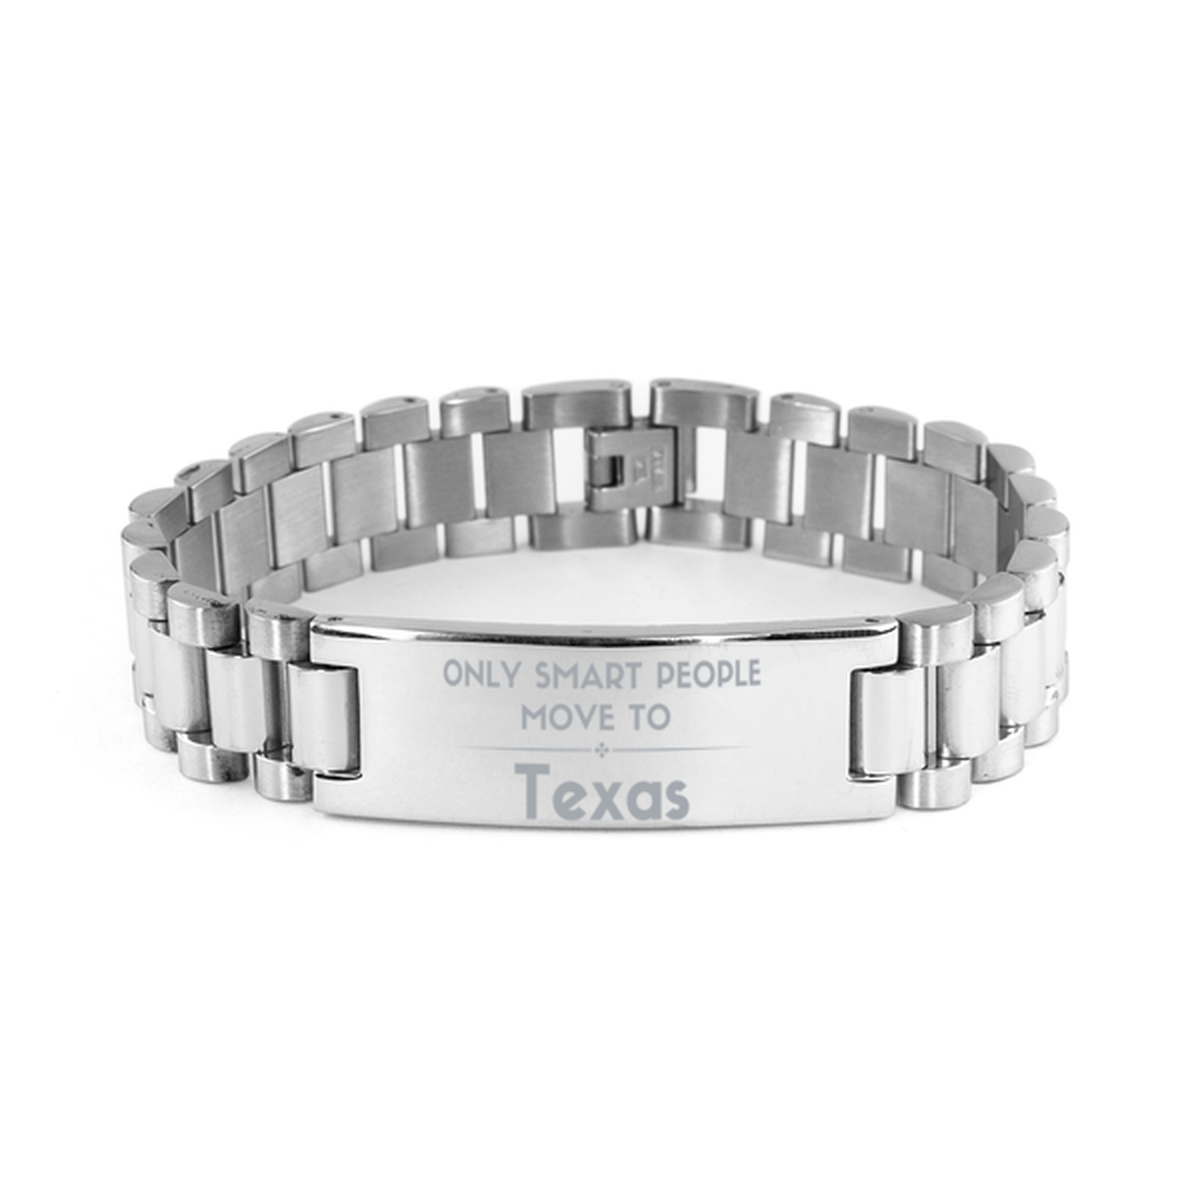 Only smart people move to Texas Ladder Stainless Steel Bracelet, Gag Gifts For Texas, Move to Texas Gifts for Friends Coworker Funny Saying Quote